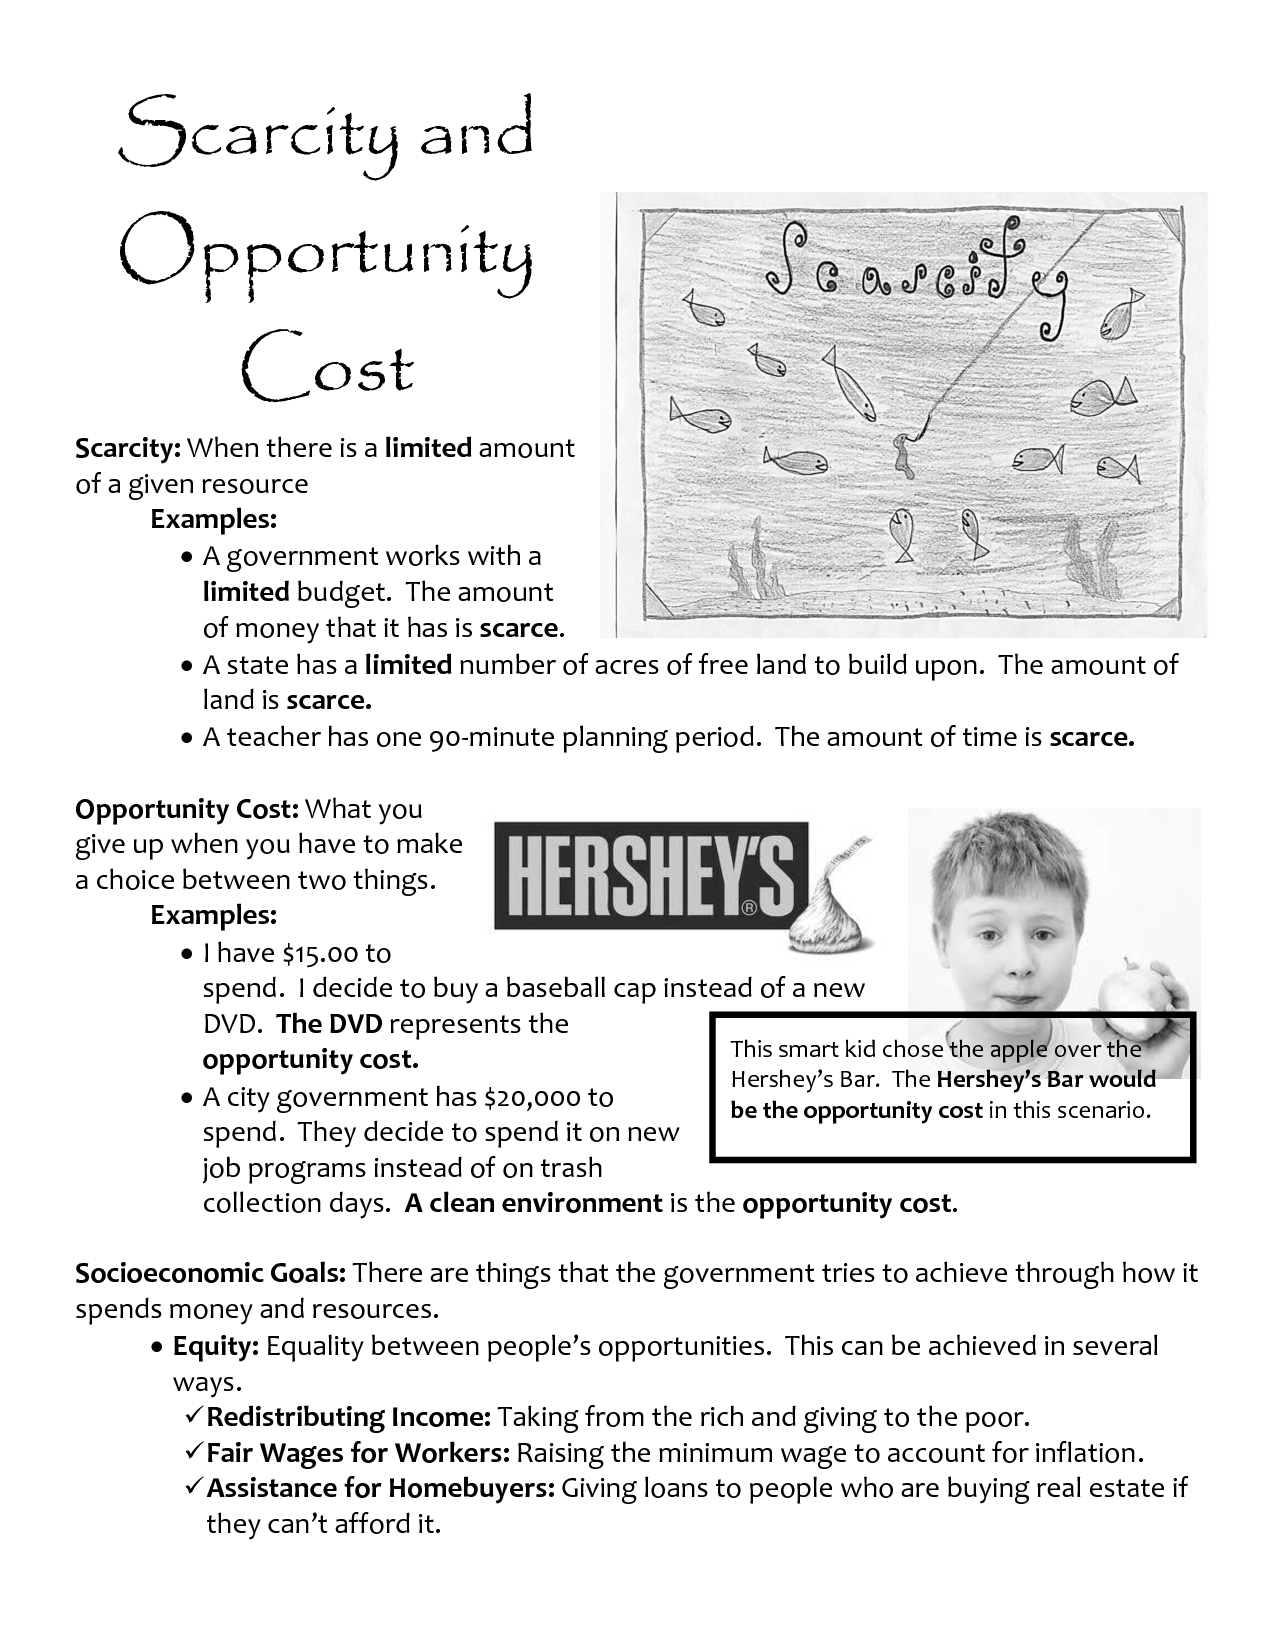 Scarcity and Opportunity Cost Worksheets for Kids